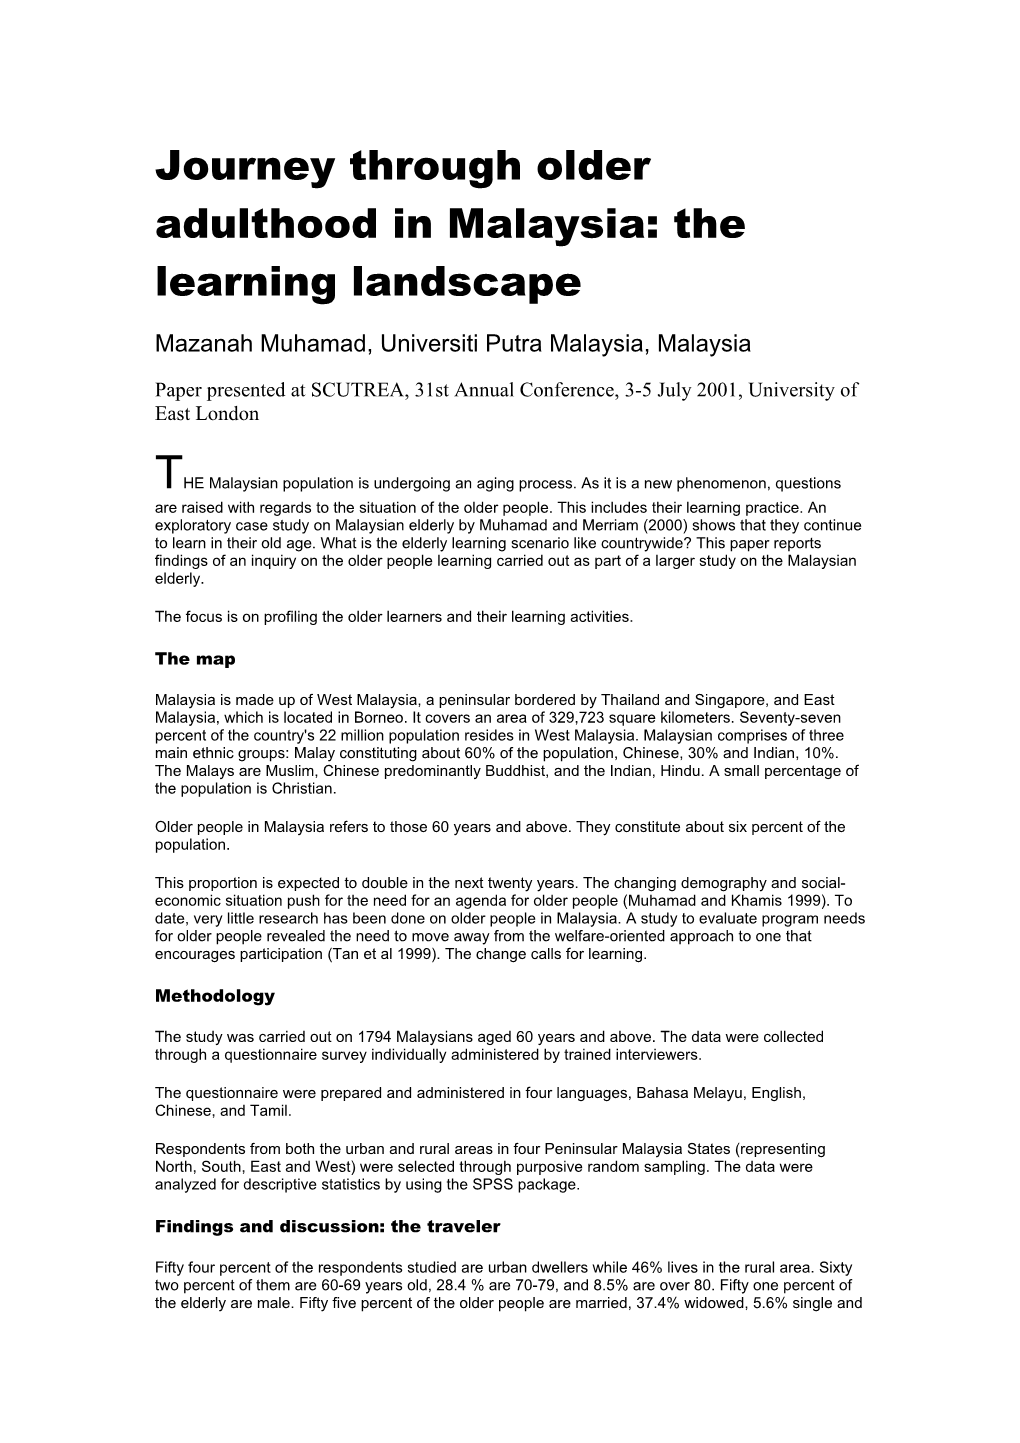 Journey Through Older Adulthood in Malaysia: the Learning Landscape